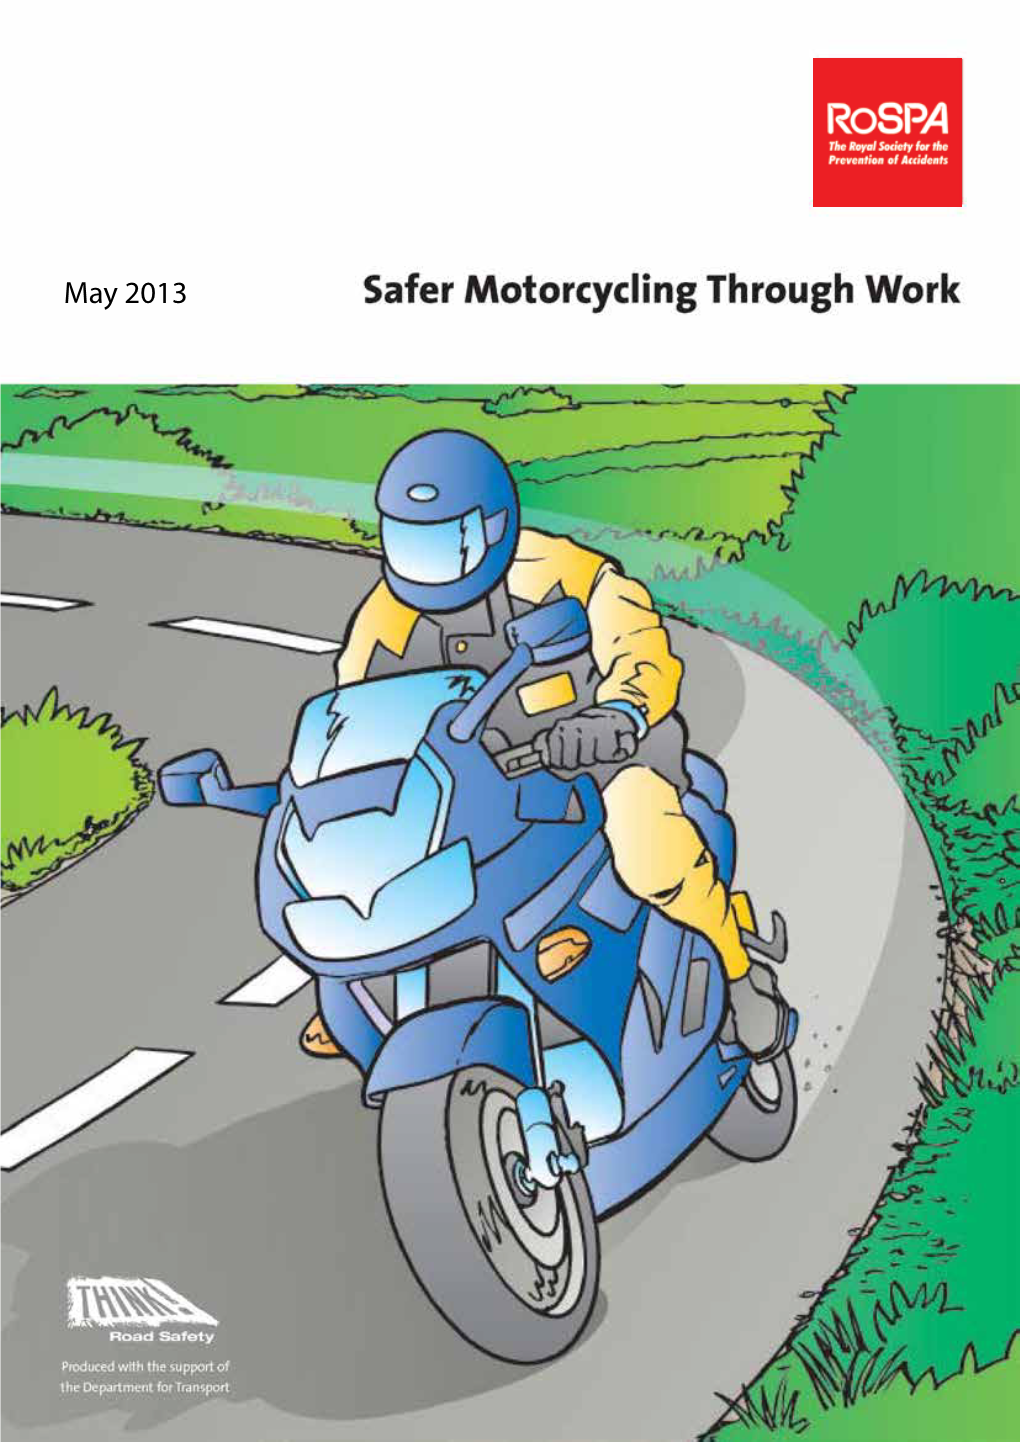 Safer Motorcycling Through Work Can Also Help a Staff Member Who Has Riders in His/Her Family, Even If They Do Not Themselves Ride